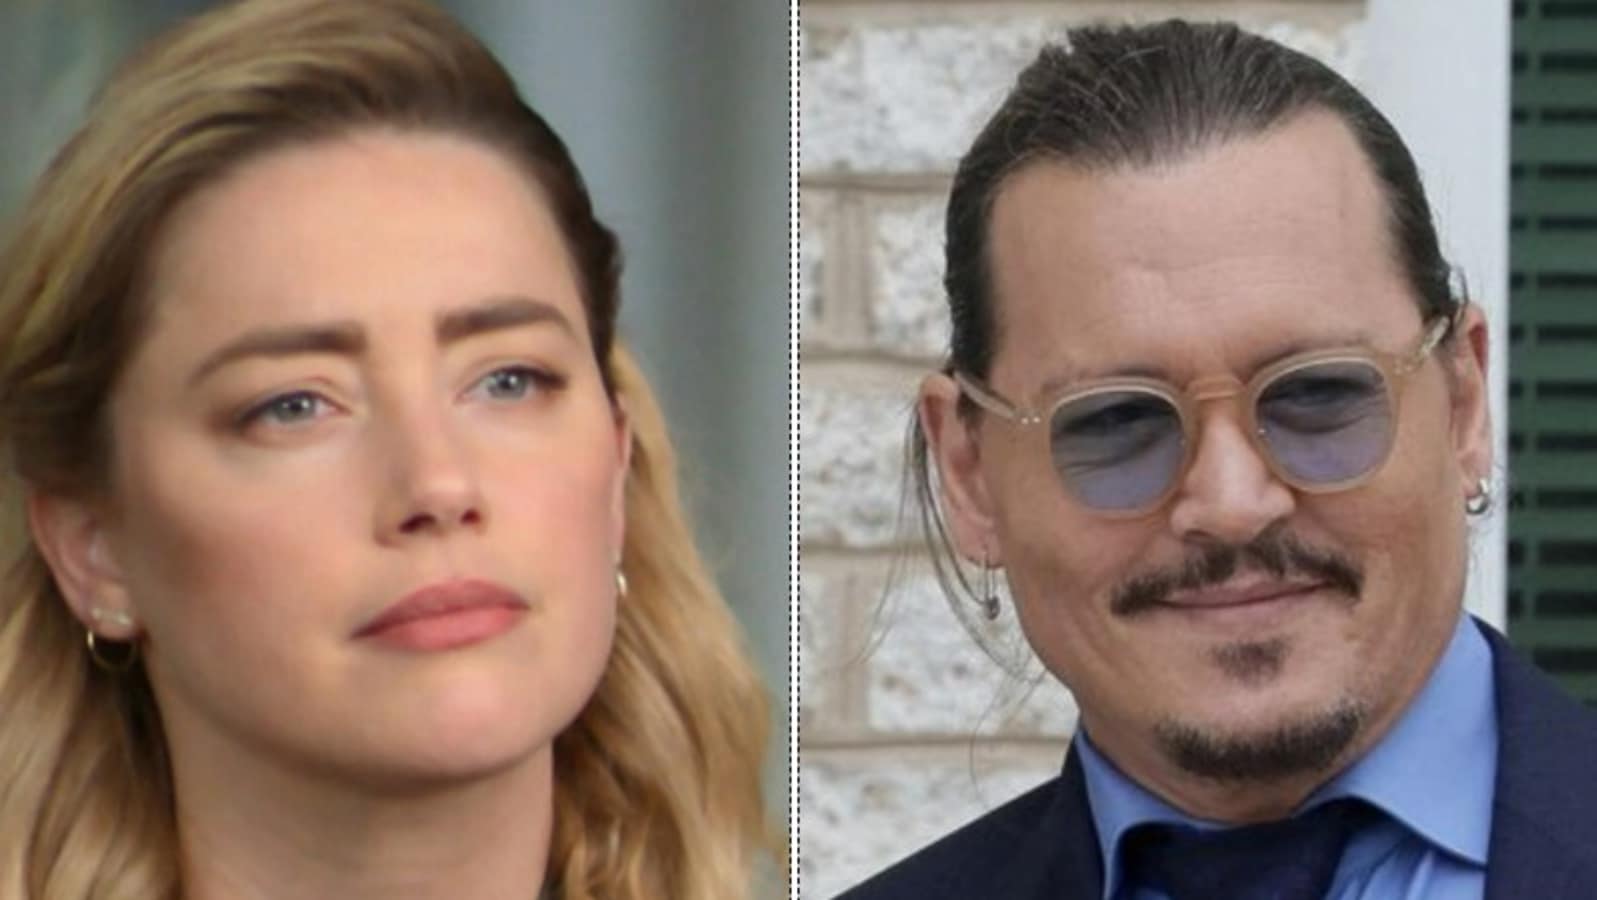 Johnny Depp could sue Amber Heard again after post-trial interview, says report